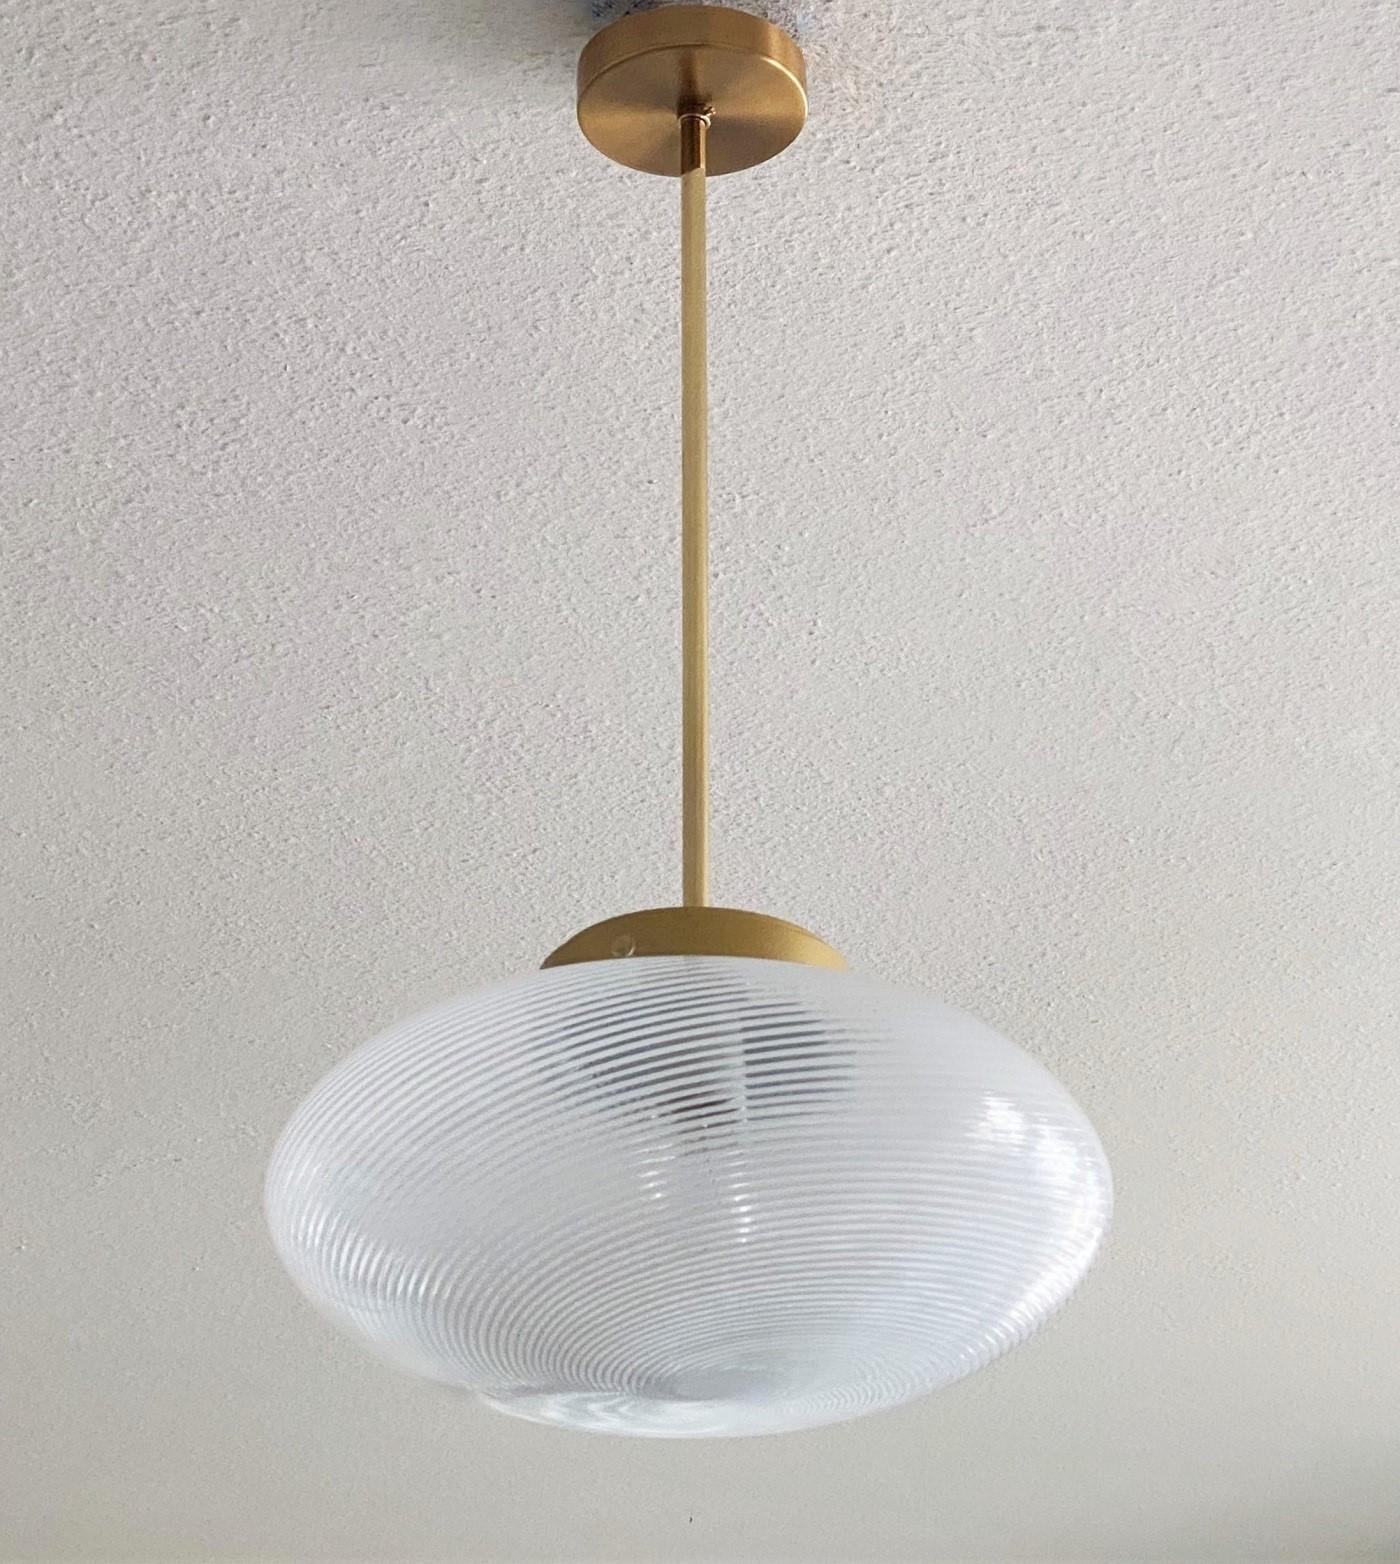 A pair of large hand blown Murano glass pendants by Ludovico Diaz de Santillana for Venini, Pendant Series -Tessuto-, Italy, 1960s. Brass and parcel gold enameled metal mounted.
Each pendant takes one E27 large sized bulb up to 100Watt. Both